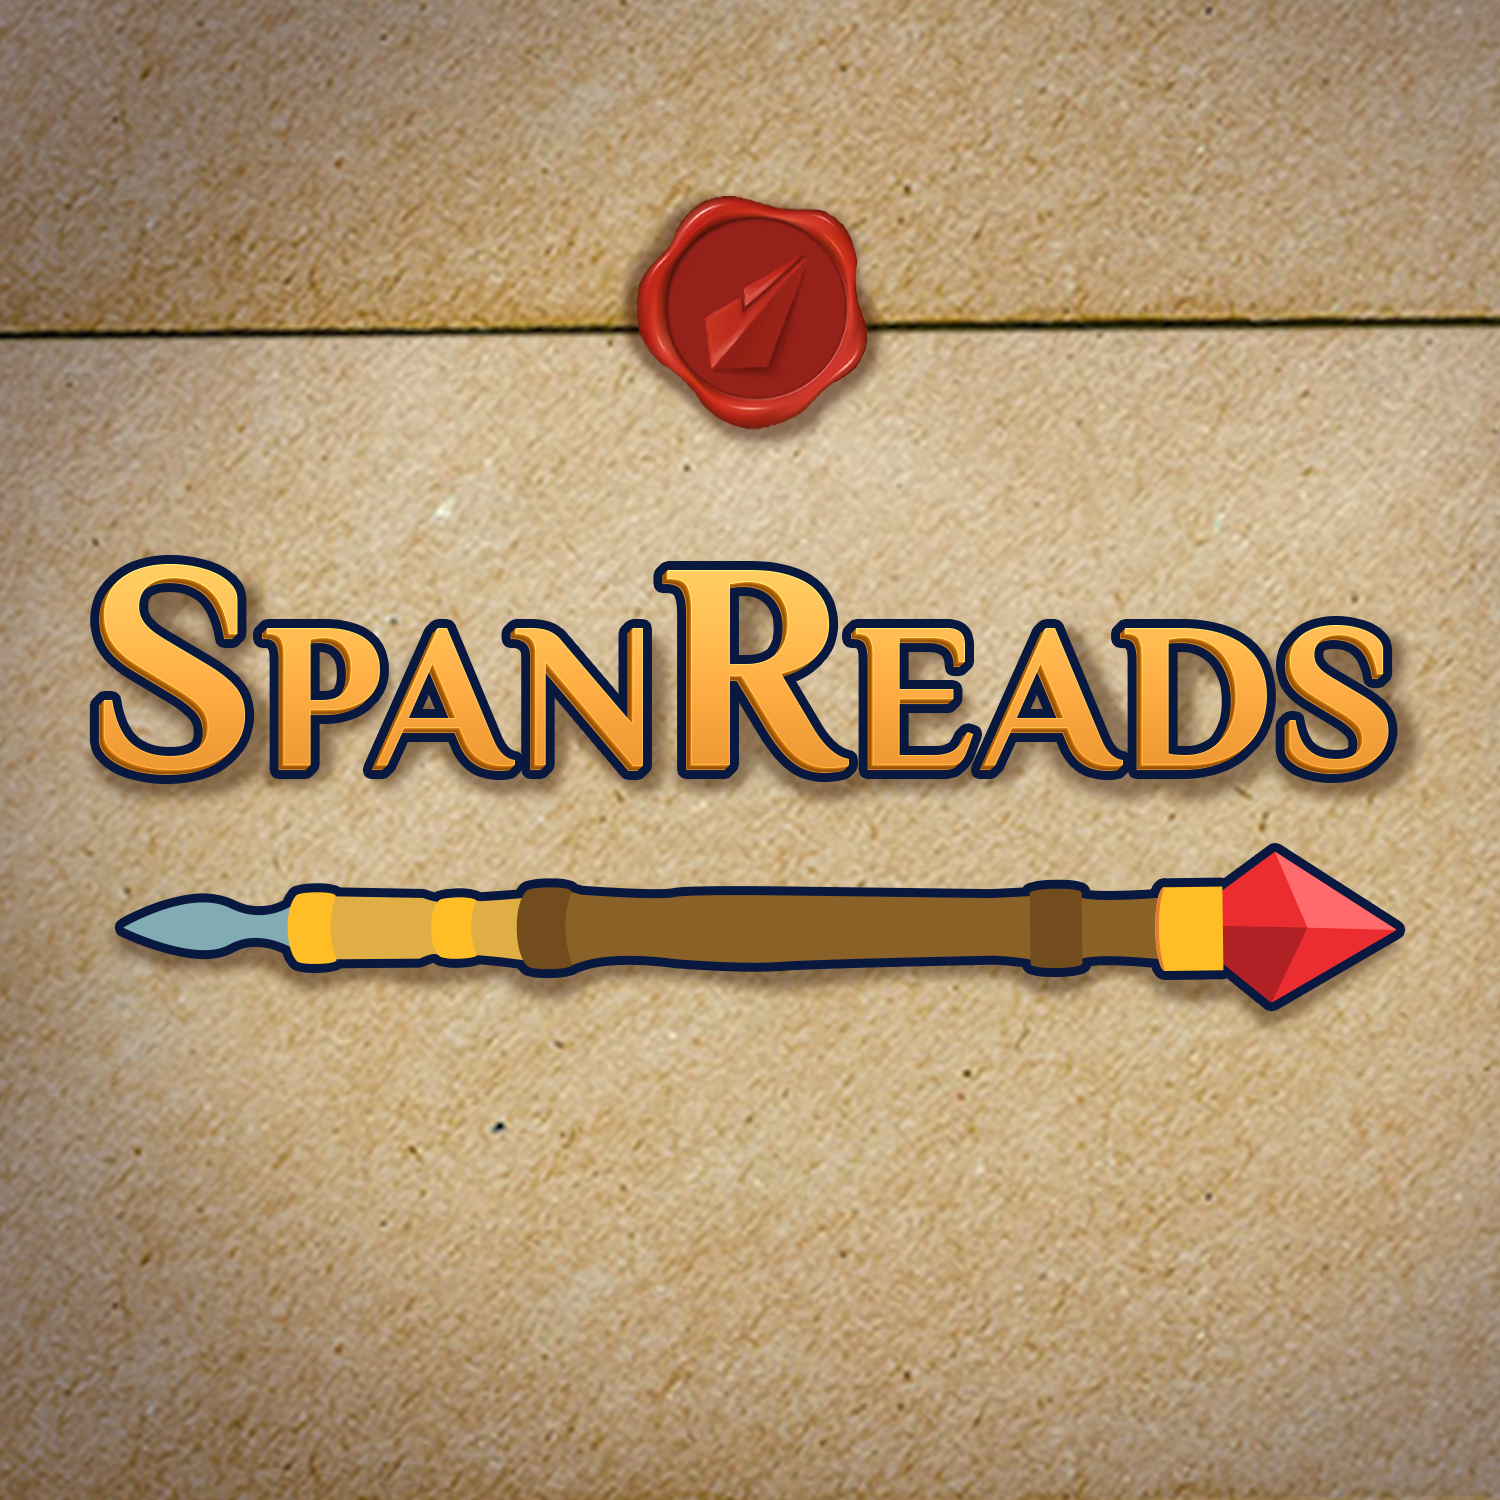 More information about "SpanReads: Skyward Flight - Characters & Relationships"